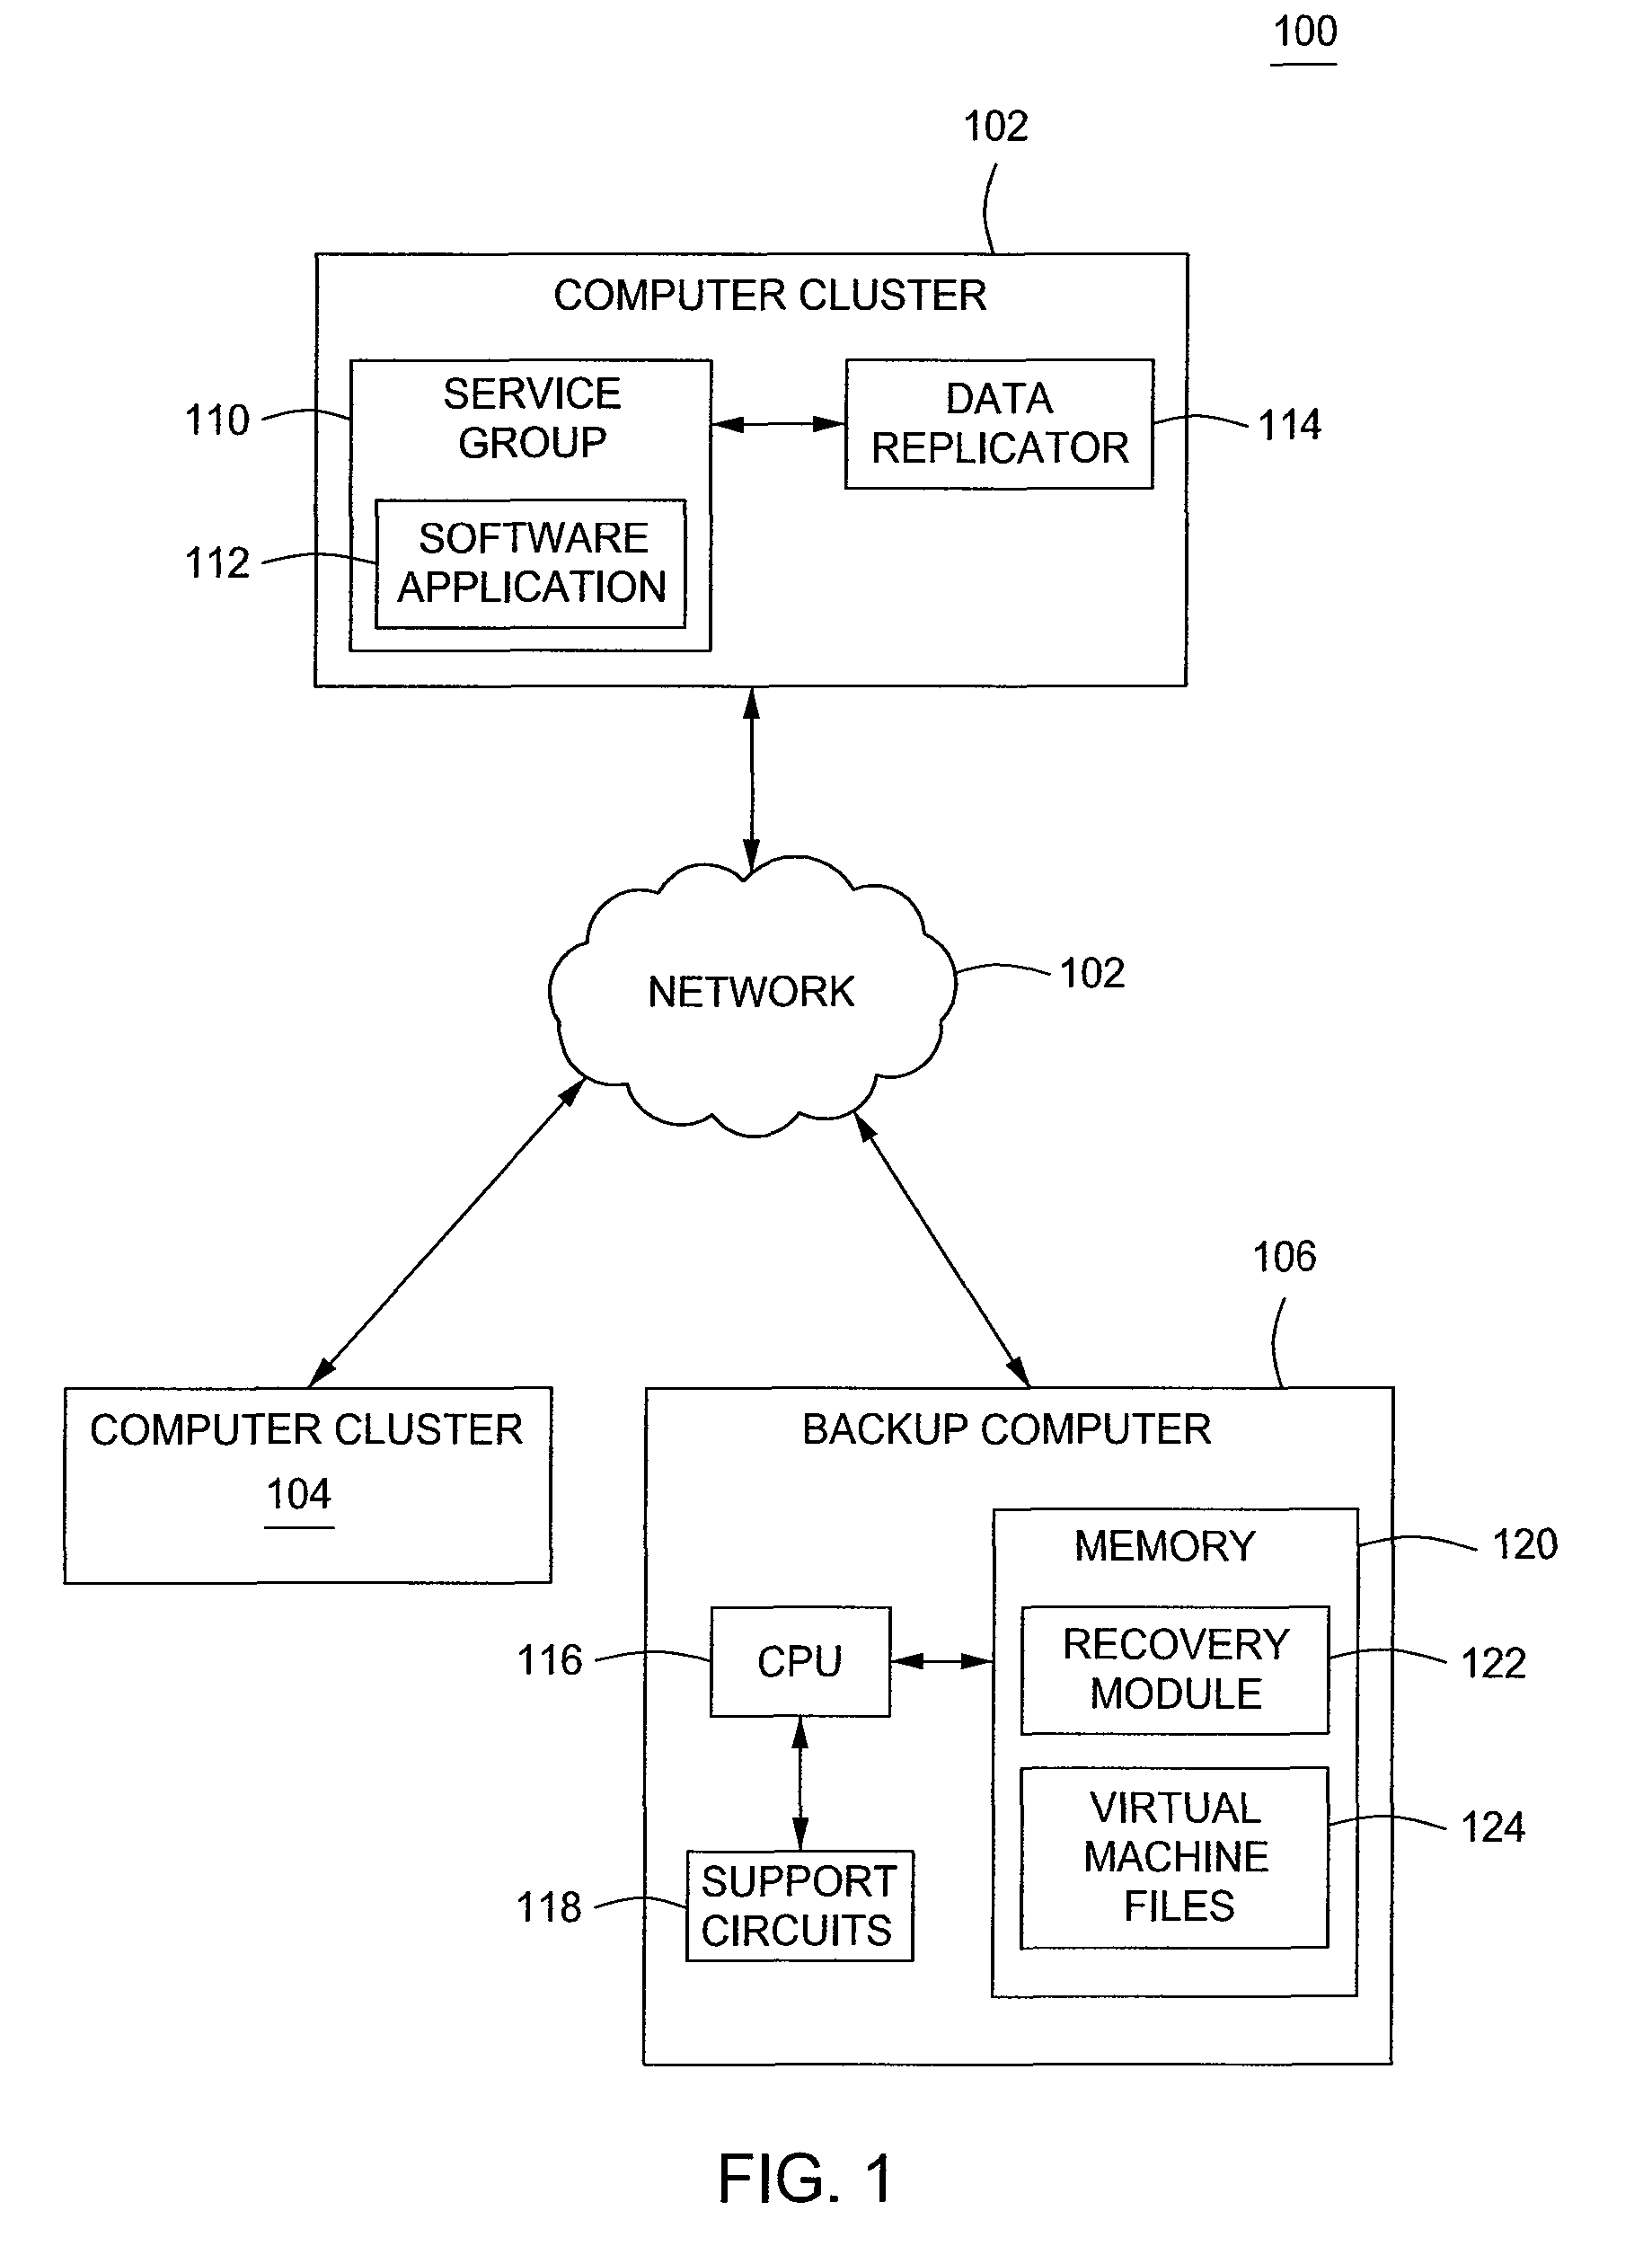 Method and apparatus for achieving high availability for an application in a computer cluster